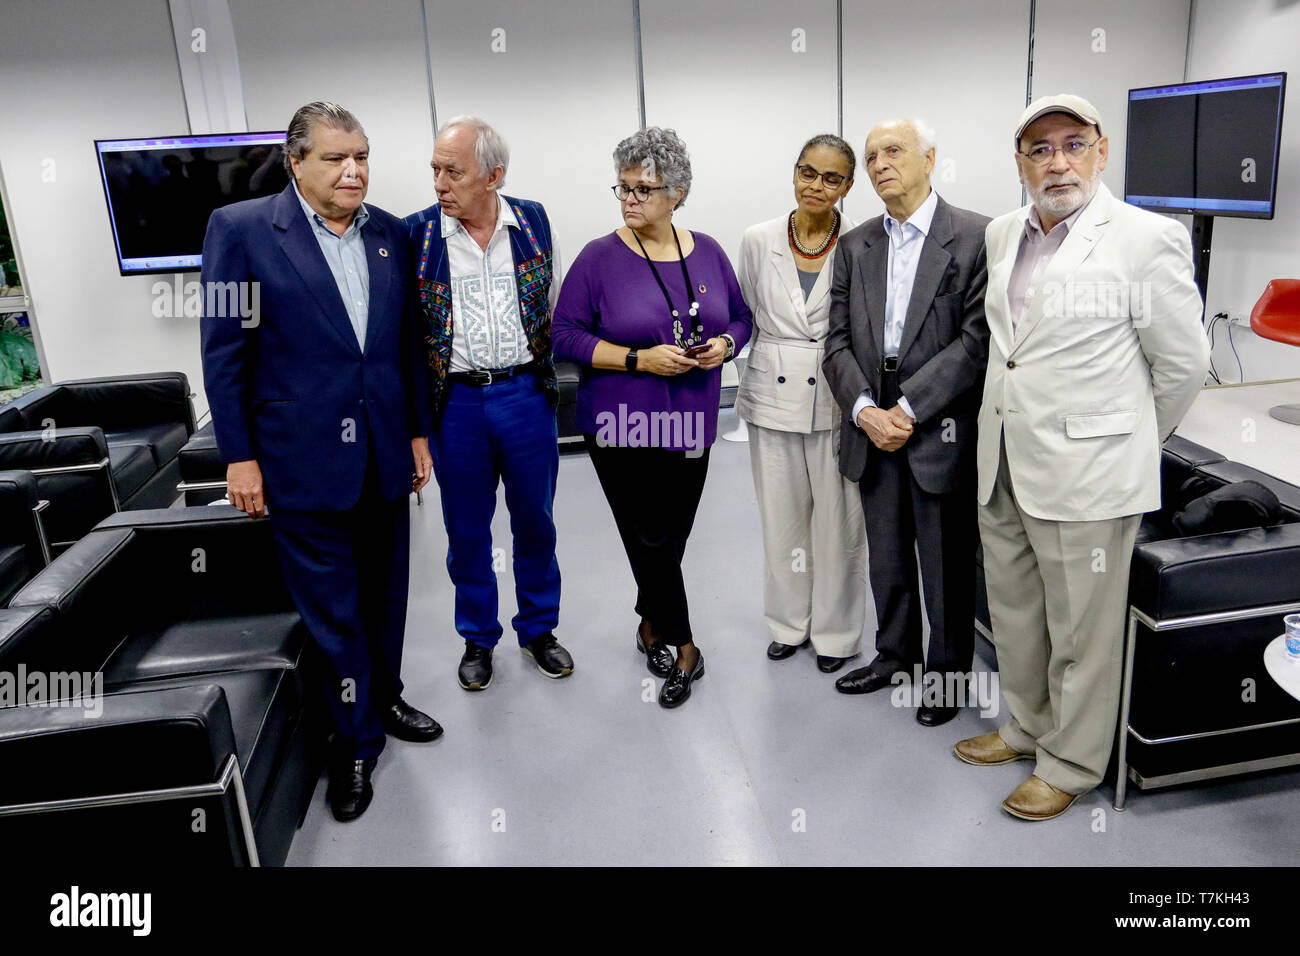 SÃO PAULO, SP - 08.05.2019: EX MINISTROS DO MEIO AMBIENTE REÚNEM USP - The former environment ministers, José Carlos Carvalho, Carlos Minc, Rubens Ricupero, José Sarney Filho, Marina Silva and Izabella Teixeira participate in a meeting of ex-ministers of State of the Environment of Brazil, held on Wednesday (08), at the Institute of Advanced Studies of the University of São Paulo, in the city of São Paulo, to evaluate the current context of Brazilian environmental policy and disseminate a positioning. (Photo: Aloisio Mauricio/Fotoarena) Stock Photo